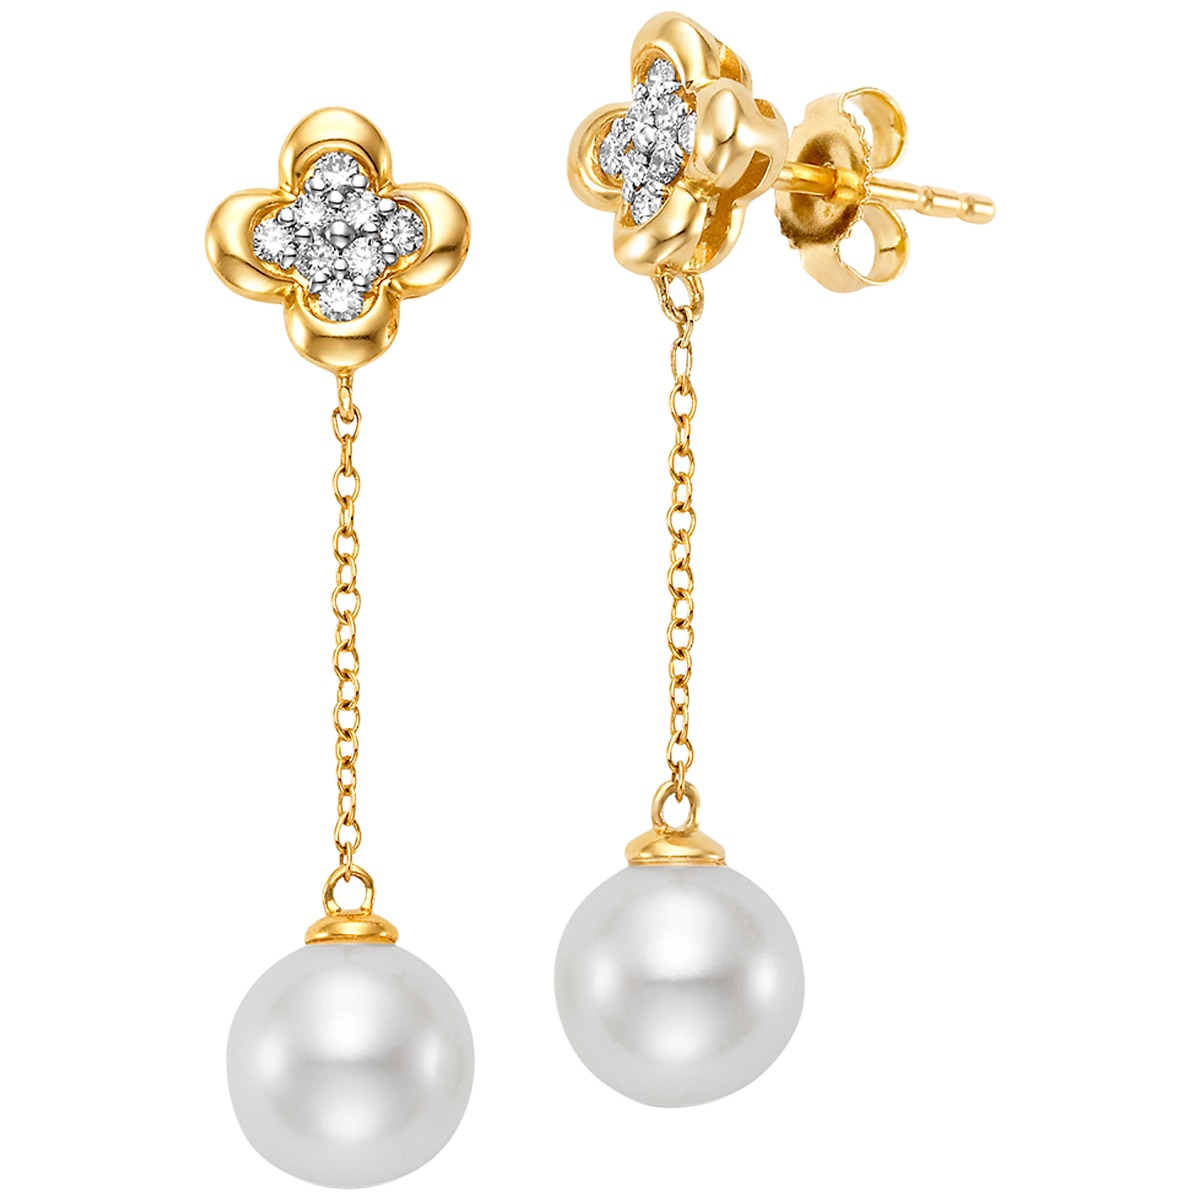 18KT Yellow Gold White Freshwater Pearl and Diamond Earrings - in depot